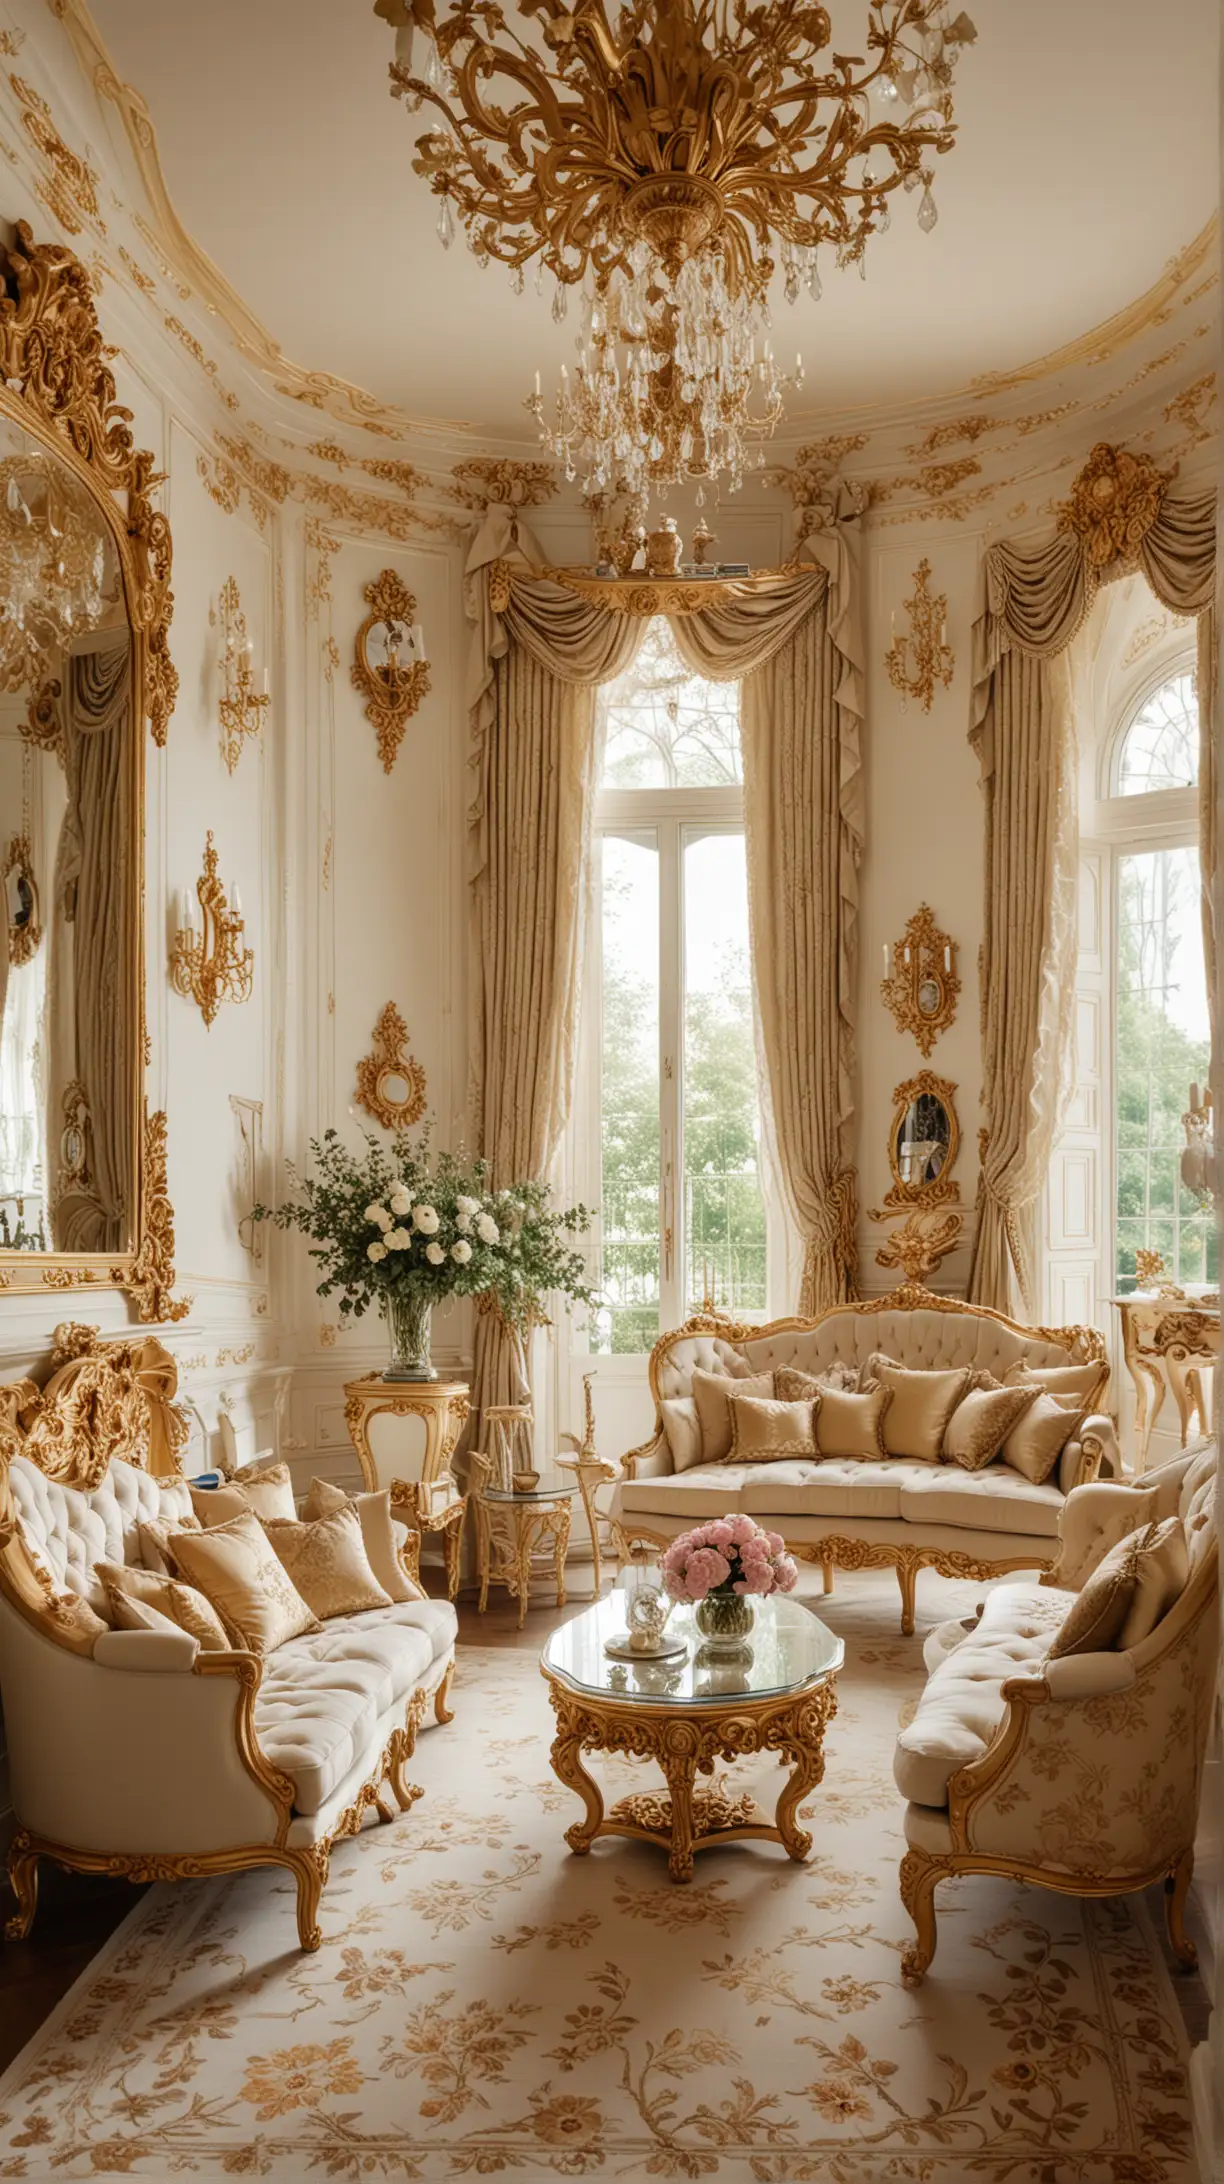 Extravagant Rococo-styled living room with light colors, gold accents, and ornate floral designs, showcasing lavish elegance.